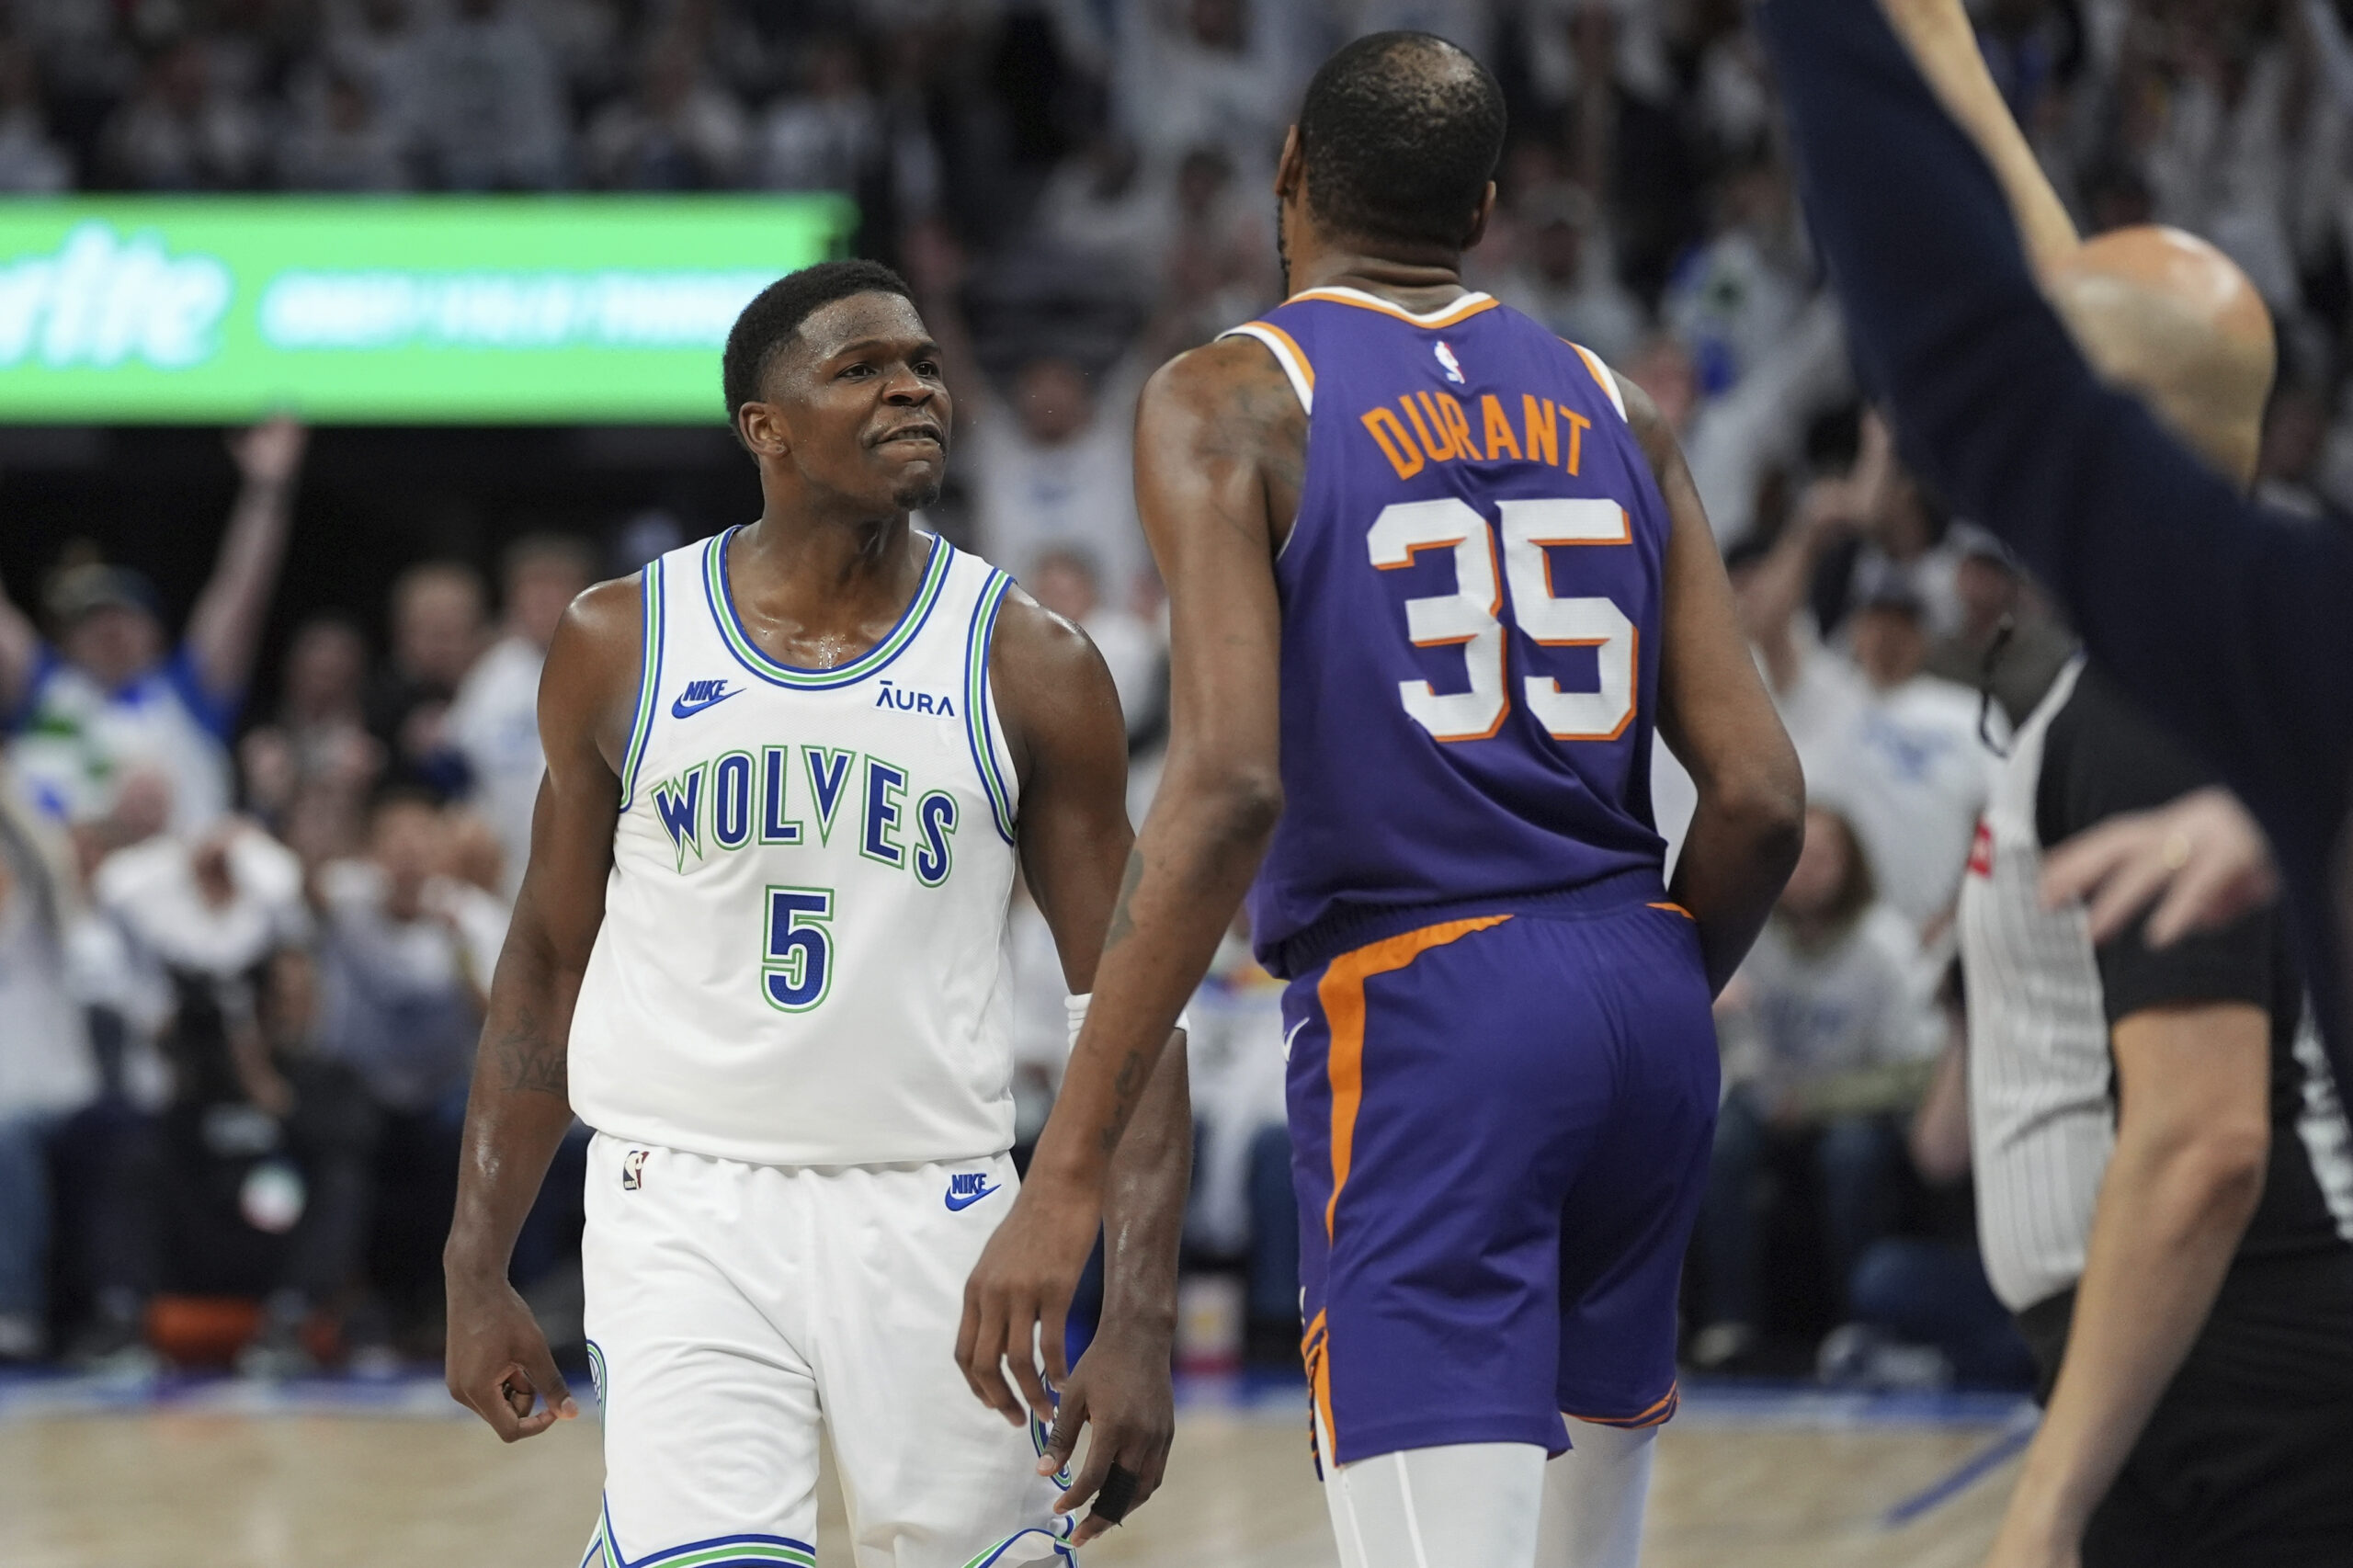 Kevin Durant Hints He Doesn’t Give a Damn About Anthony Edwards’ DX Celebration